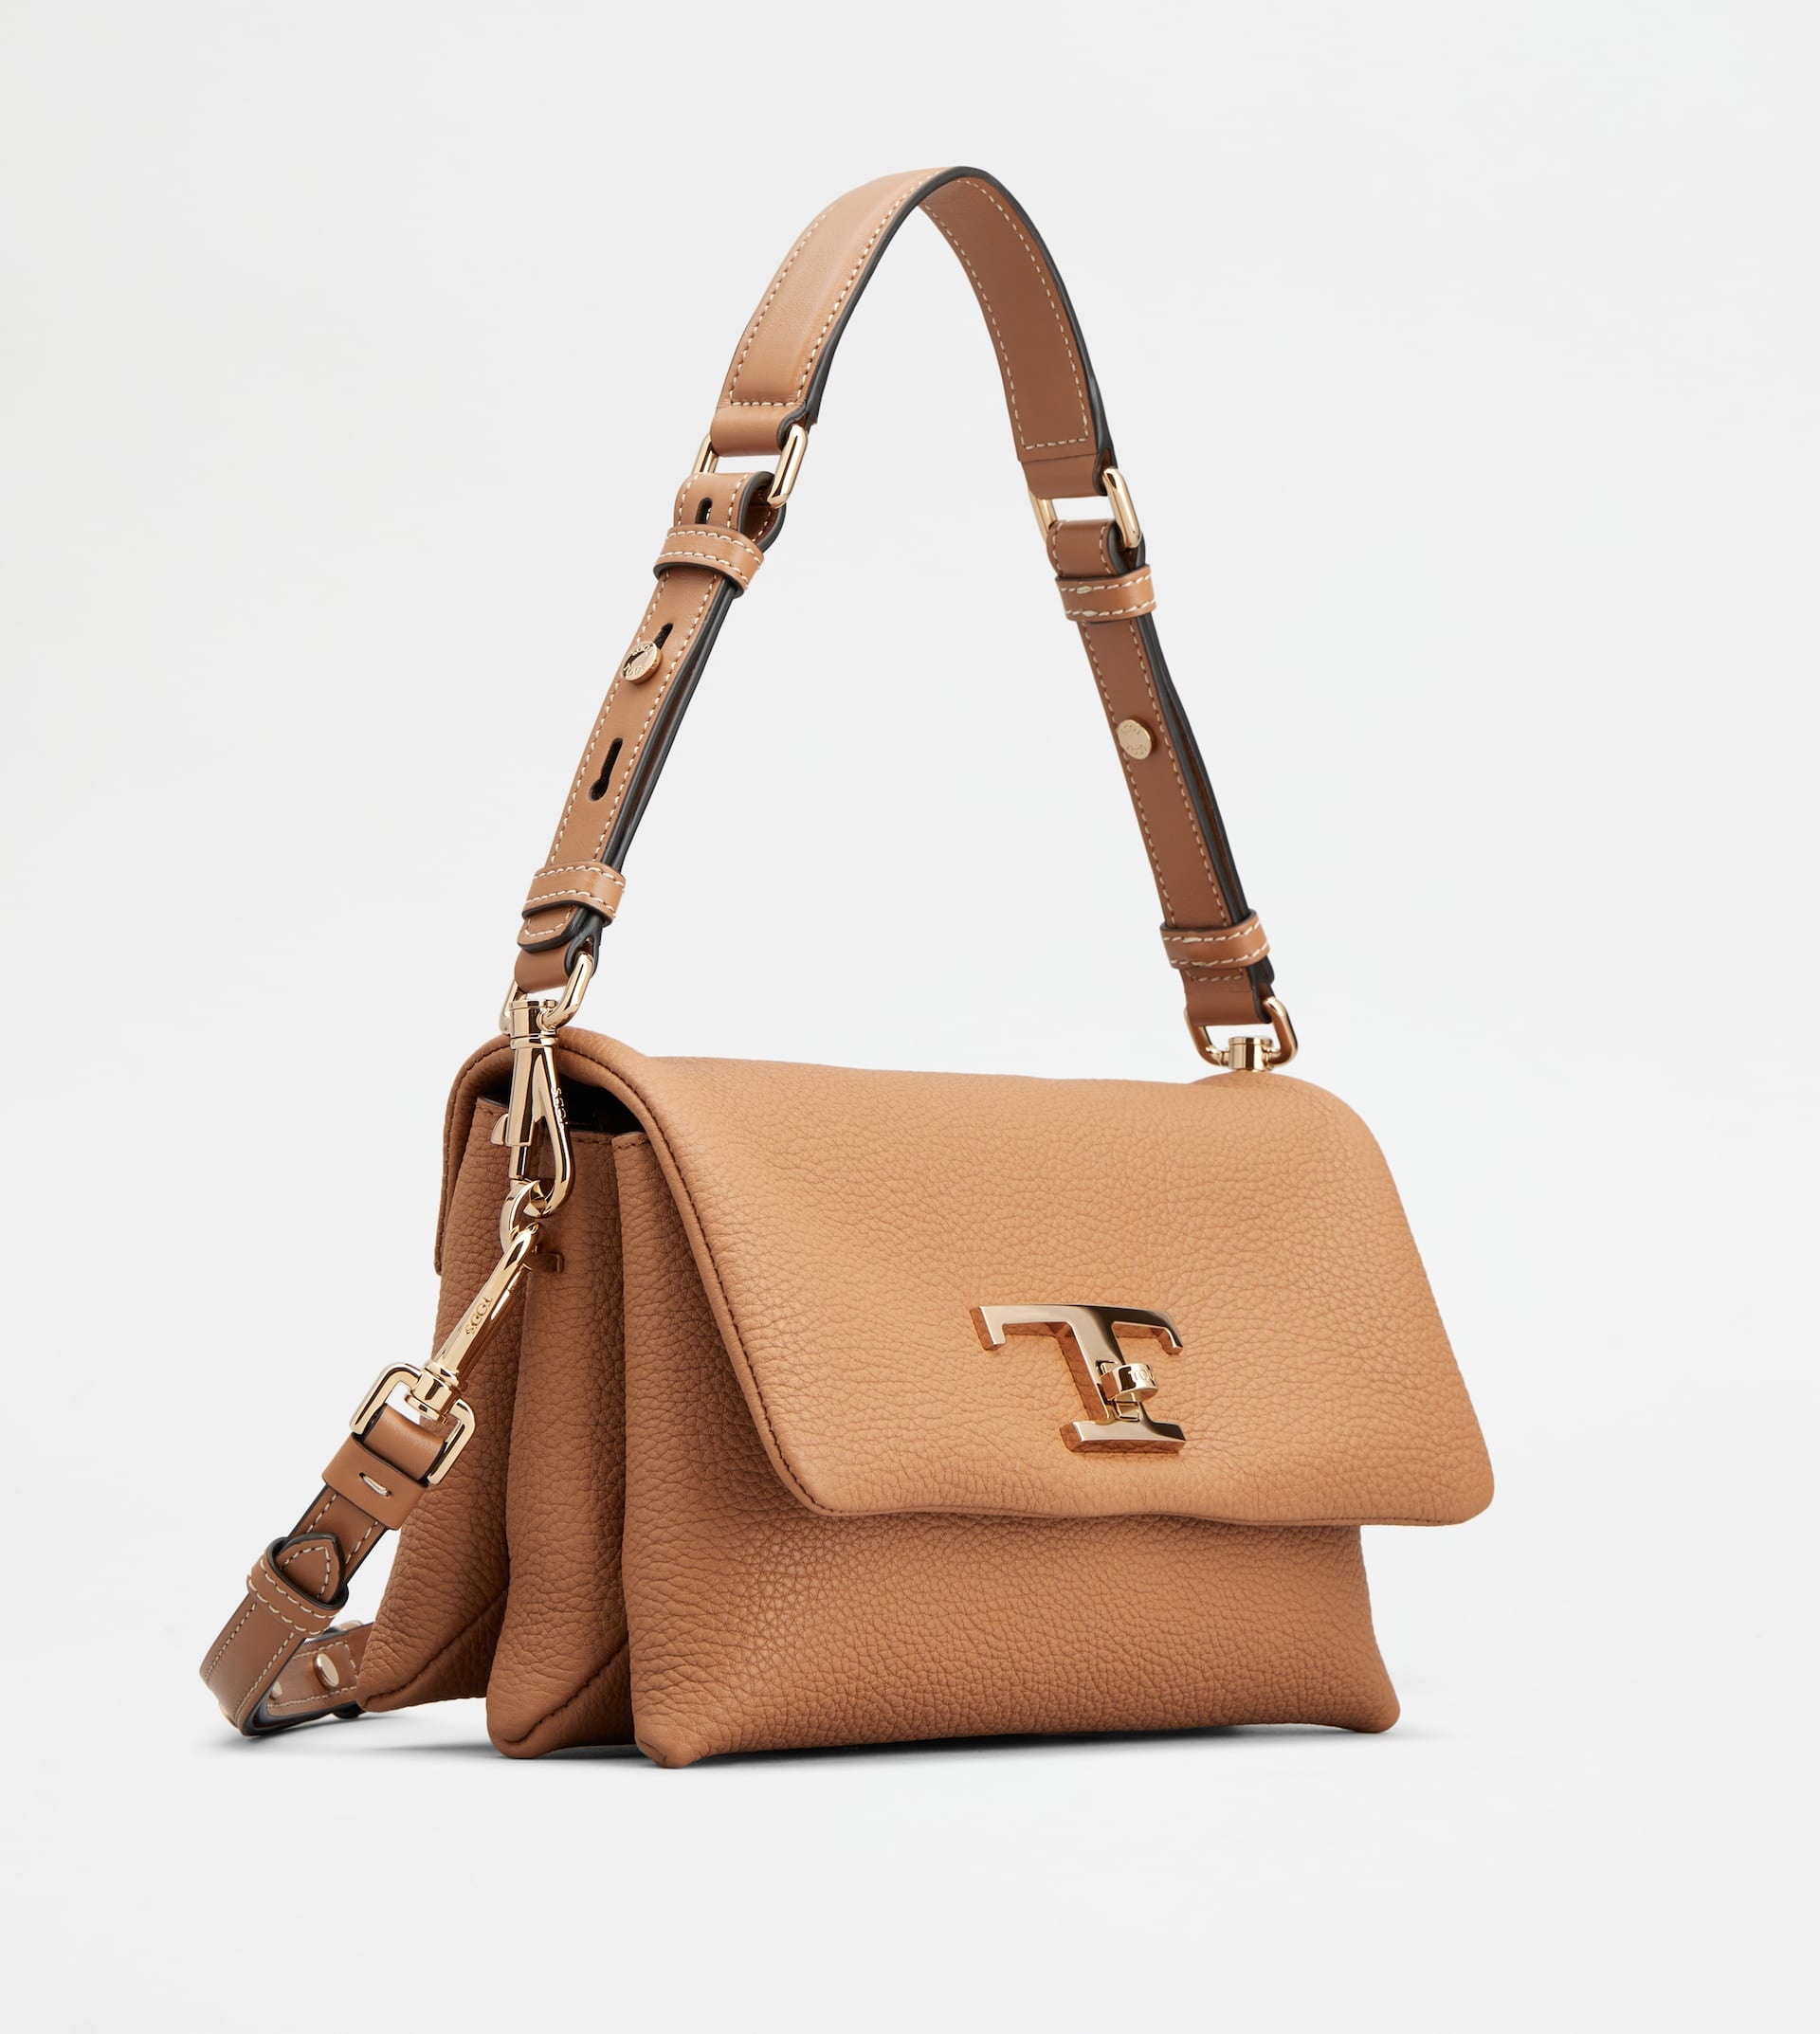 T TIMELESS FLAP BAG IN LEATHER MINI - BROWN - 3